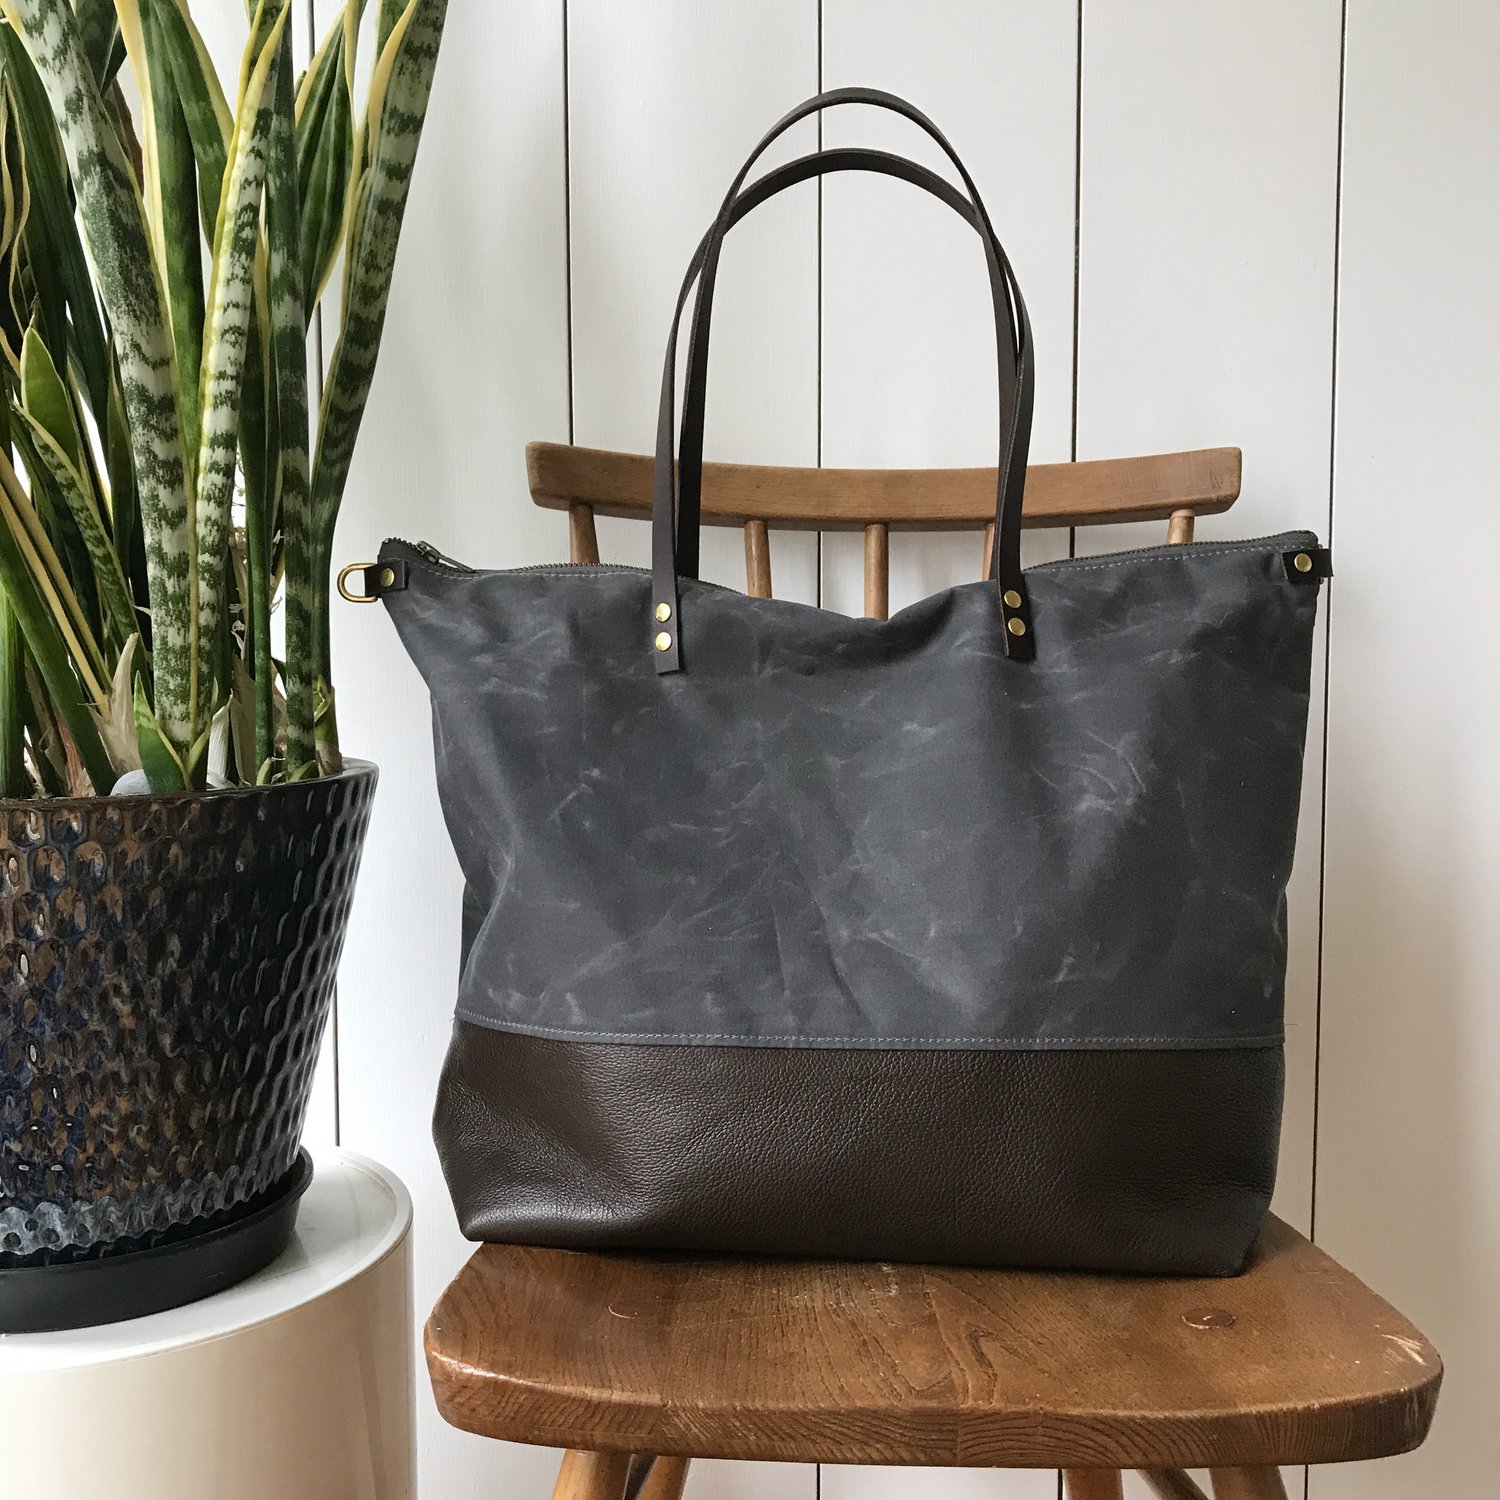 Waxed Canvas Tote Bag, Leather and Waxed Canvas Purse